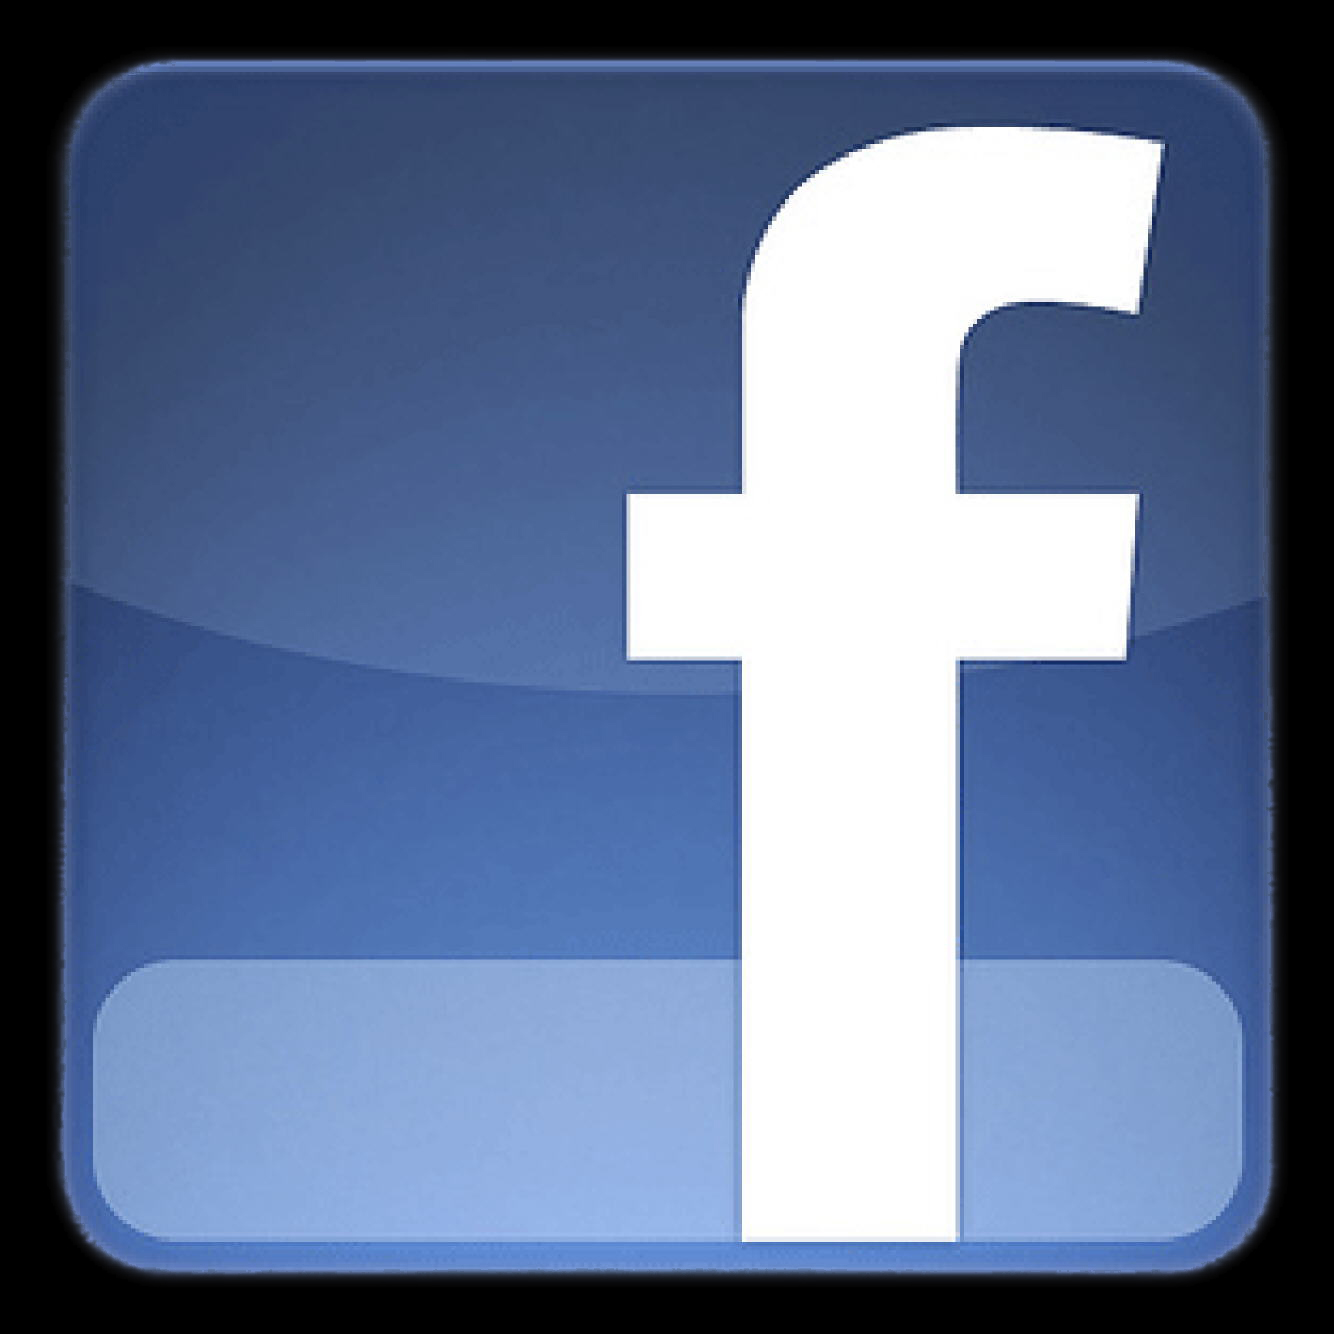 There Is 39 Facebook Like Free Cliparts All Used For Free